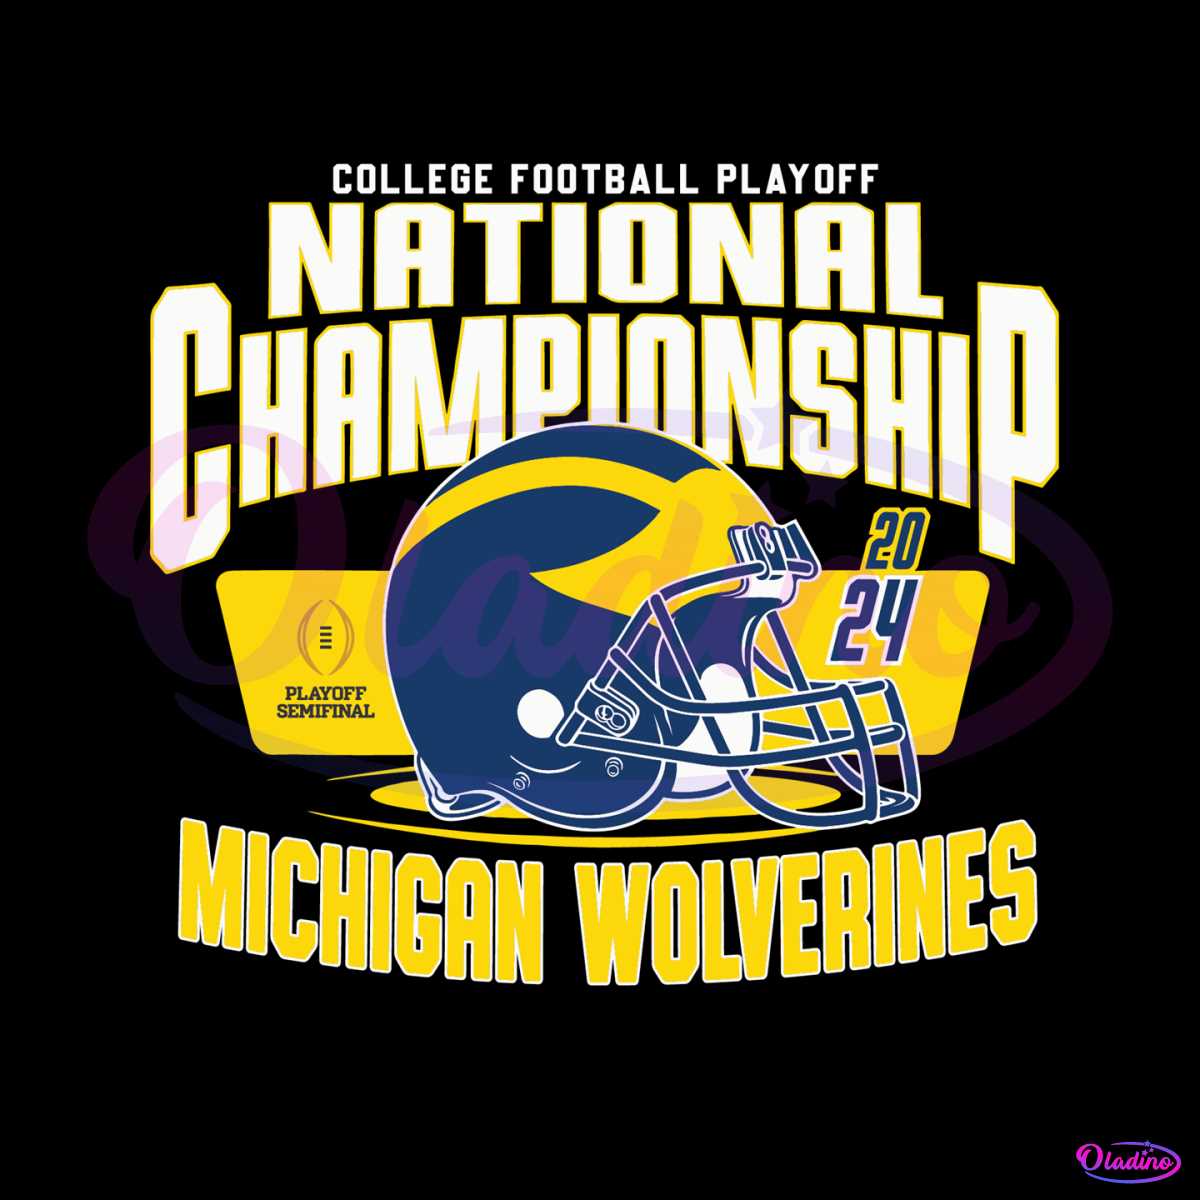 michigan-wolverines-college-football-playoff-champs-svg